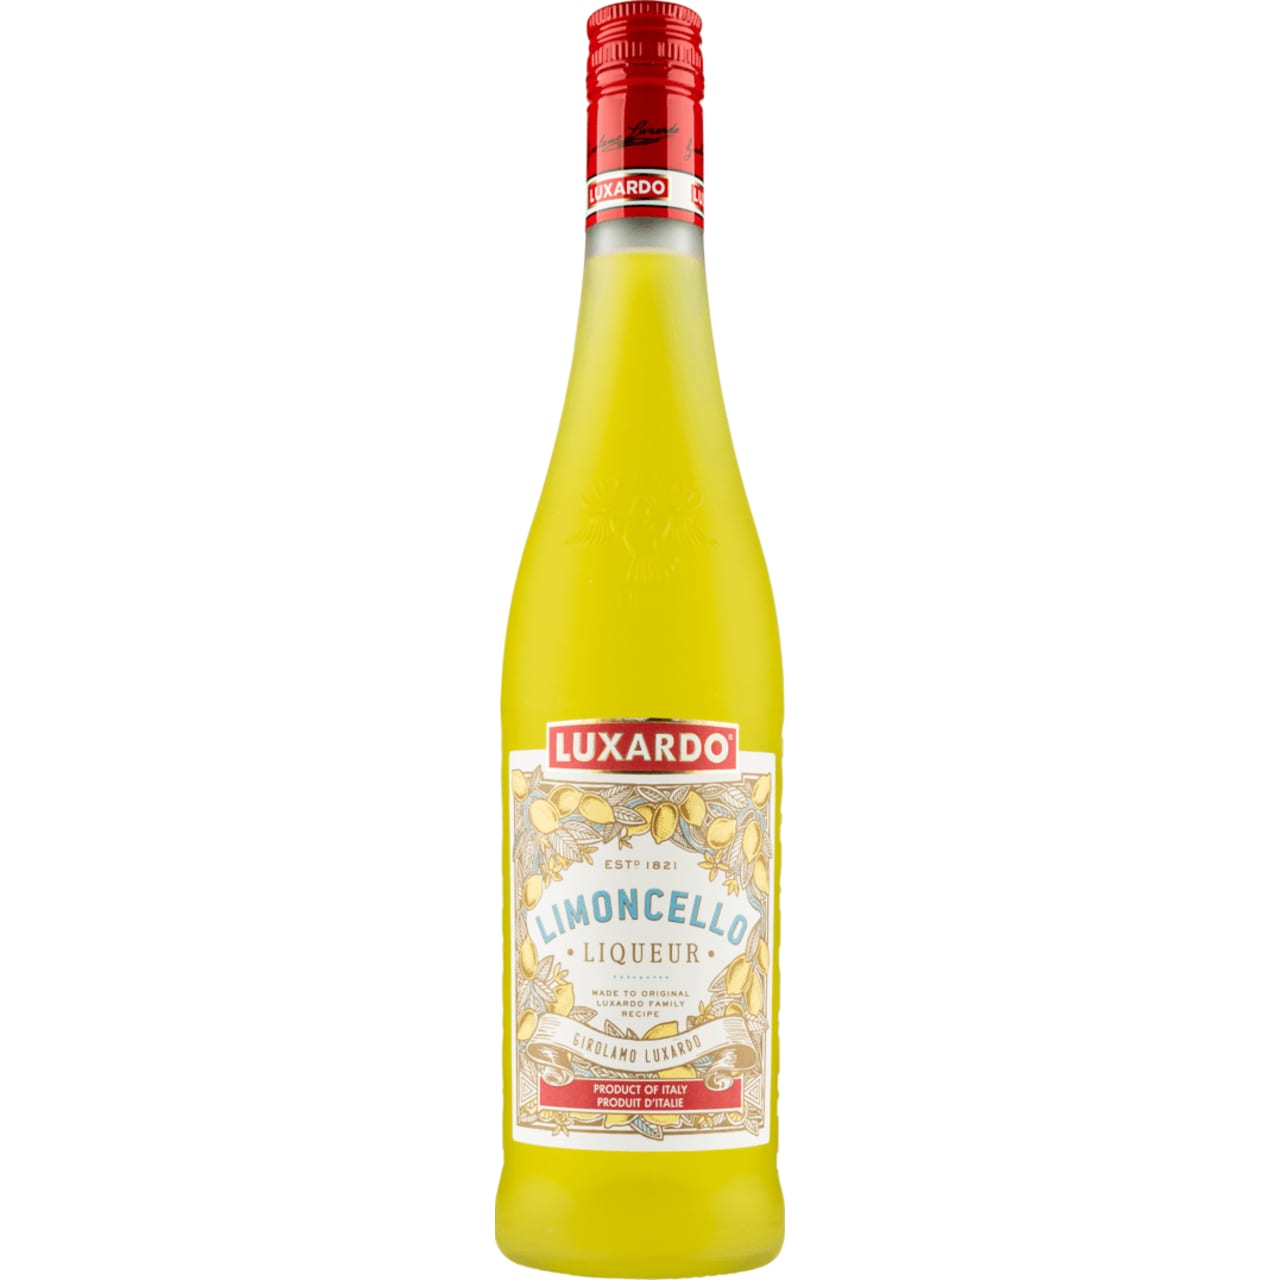 Limoncello is one of the most recognised Italian liqueurs. It is made by infusing lemon peel in alcohol using ancient traditional methods enhancing the natural aroma and fresh taste of southern Italian lemons.